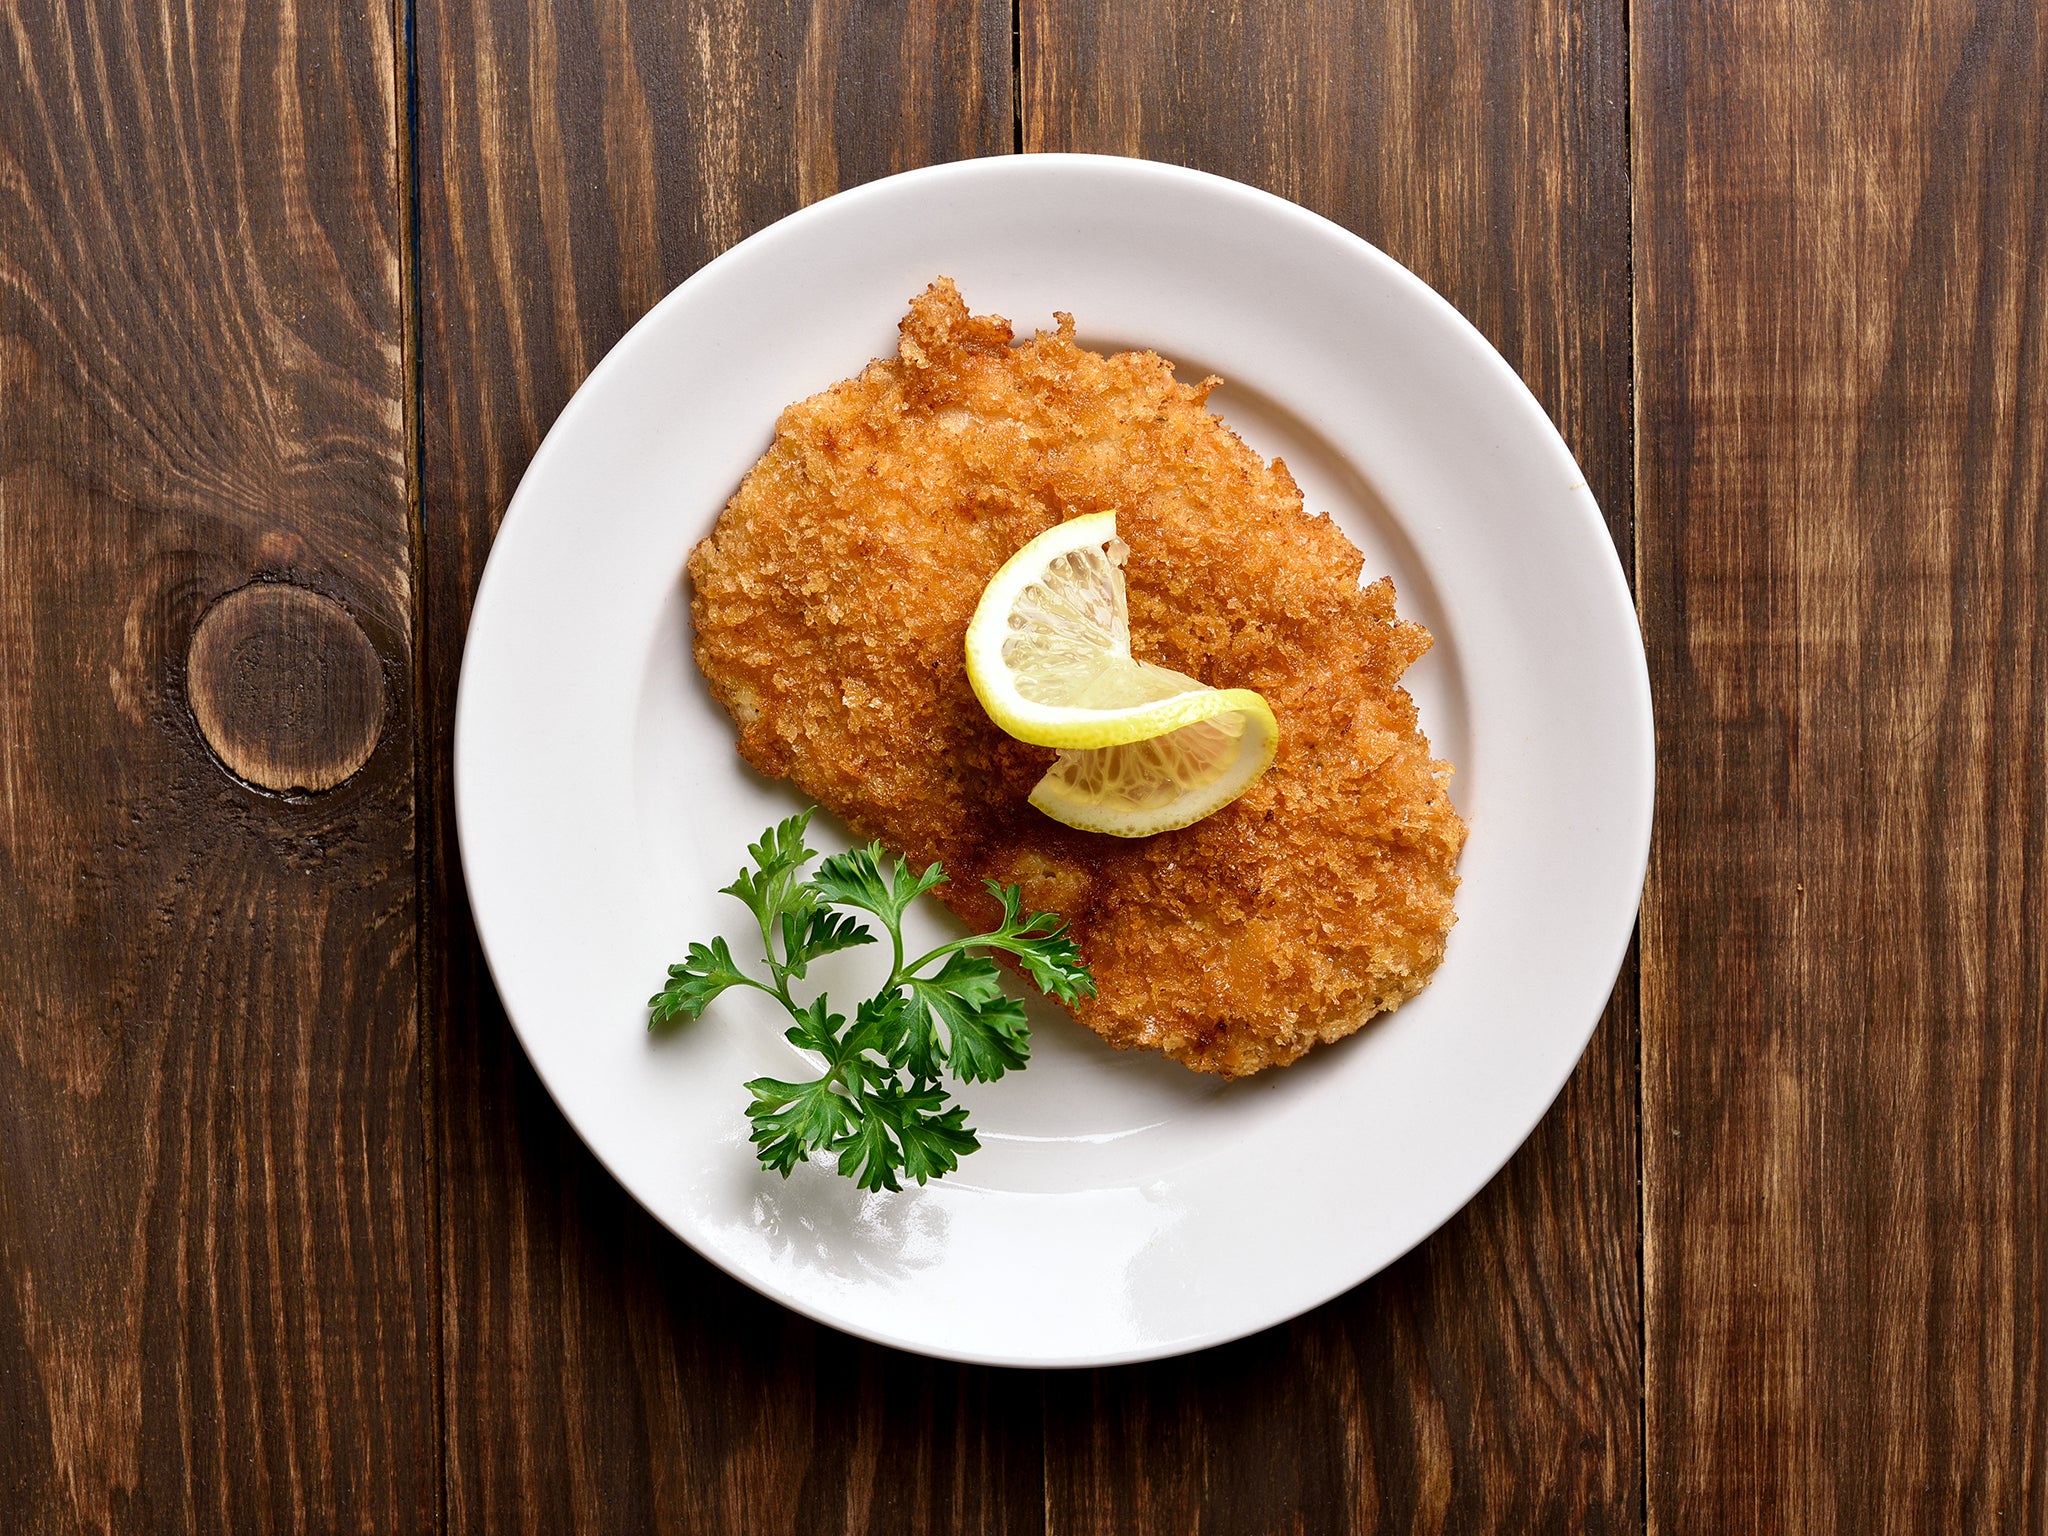 This fast weeknight dinner features quick-cooking flounder prepared alla milanese